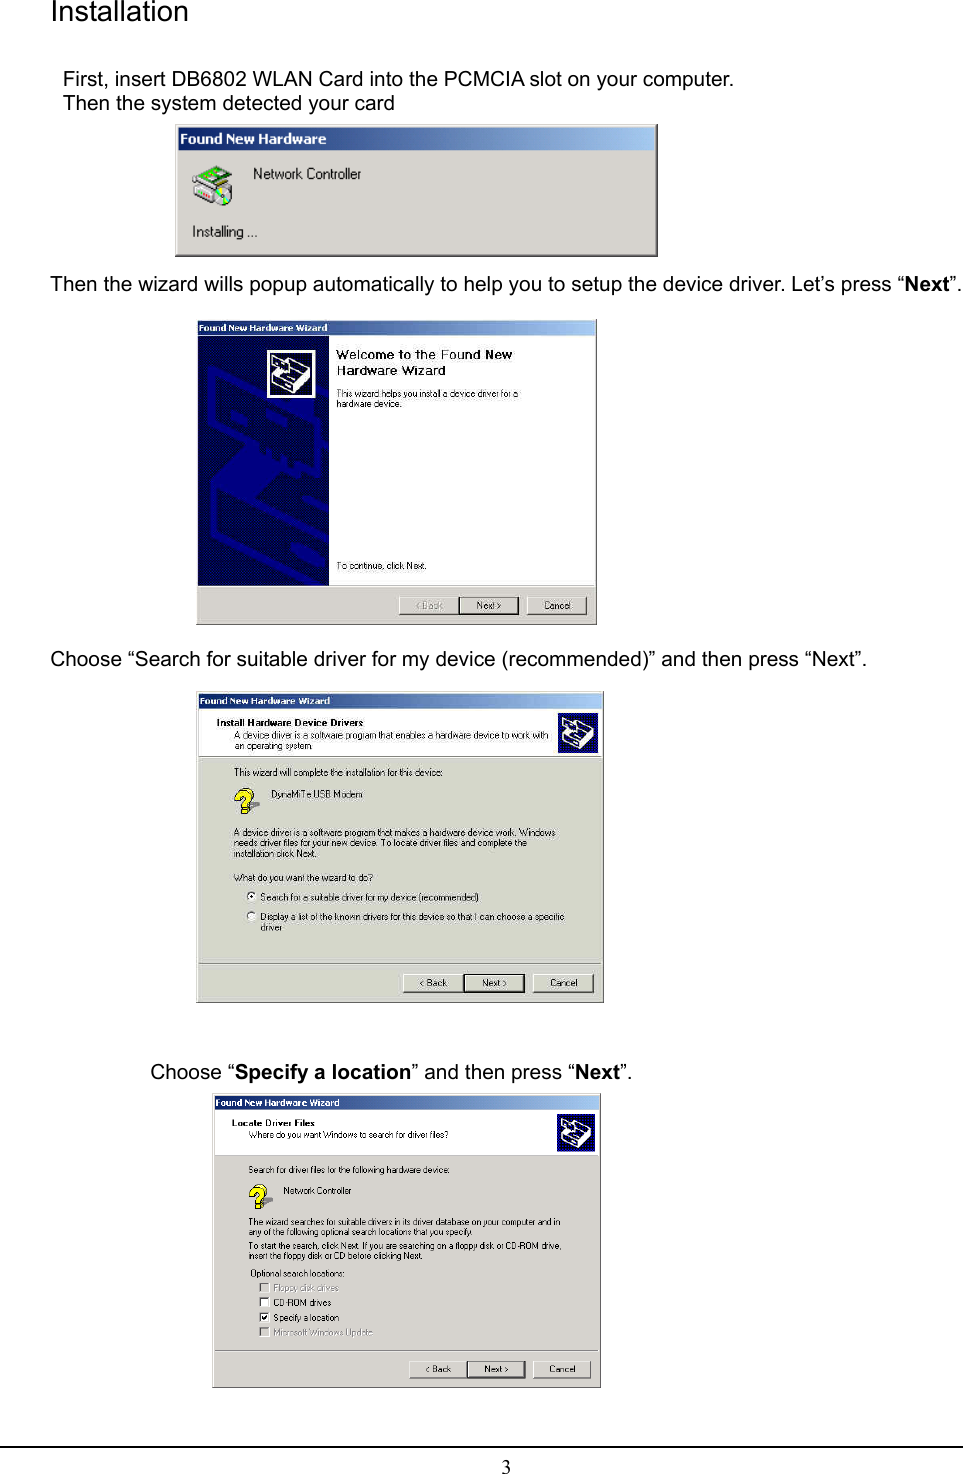   3Installation                              First, insert DB6802 WLAN Card into the PCMCIA slot on your computer. Then the system detected your card               Then the wizard wills popup automatically to help you to setup the device driver. Let’s press “Next”.  Choose “Search for suitable driver for my device (recommended)” and then press “Next”.   Choose “Specify a location” and then press “Next”.   